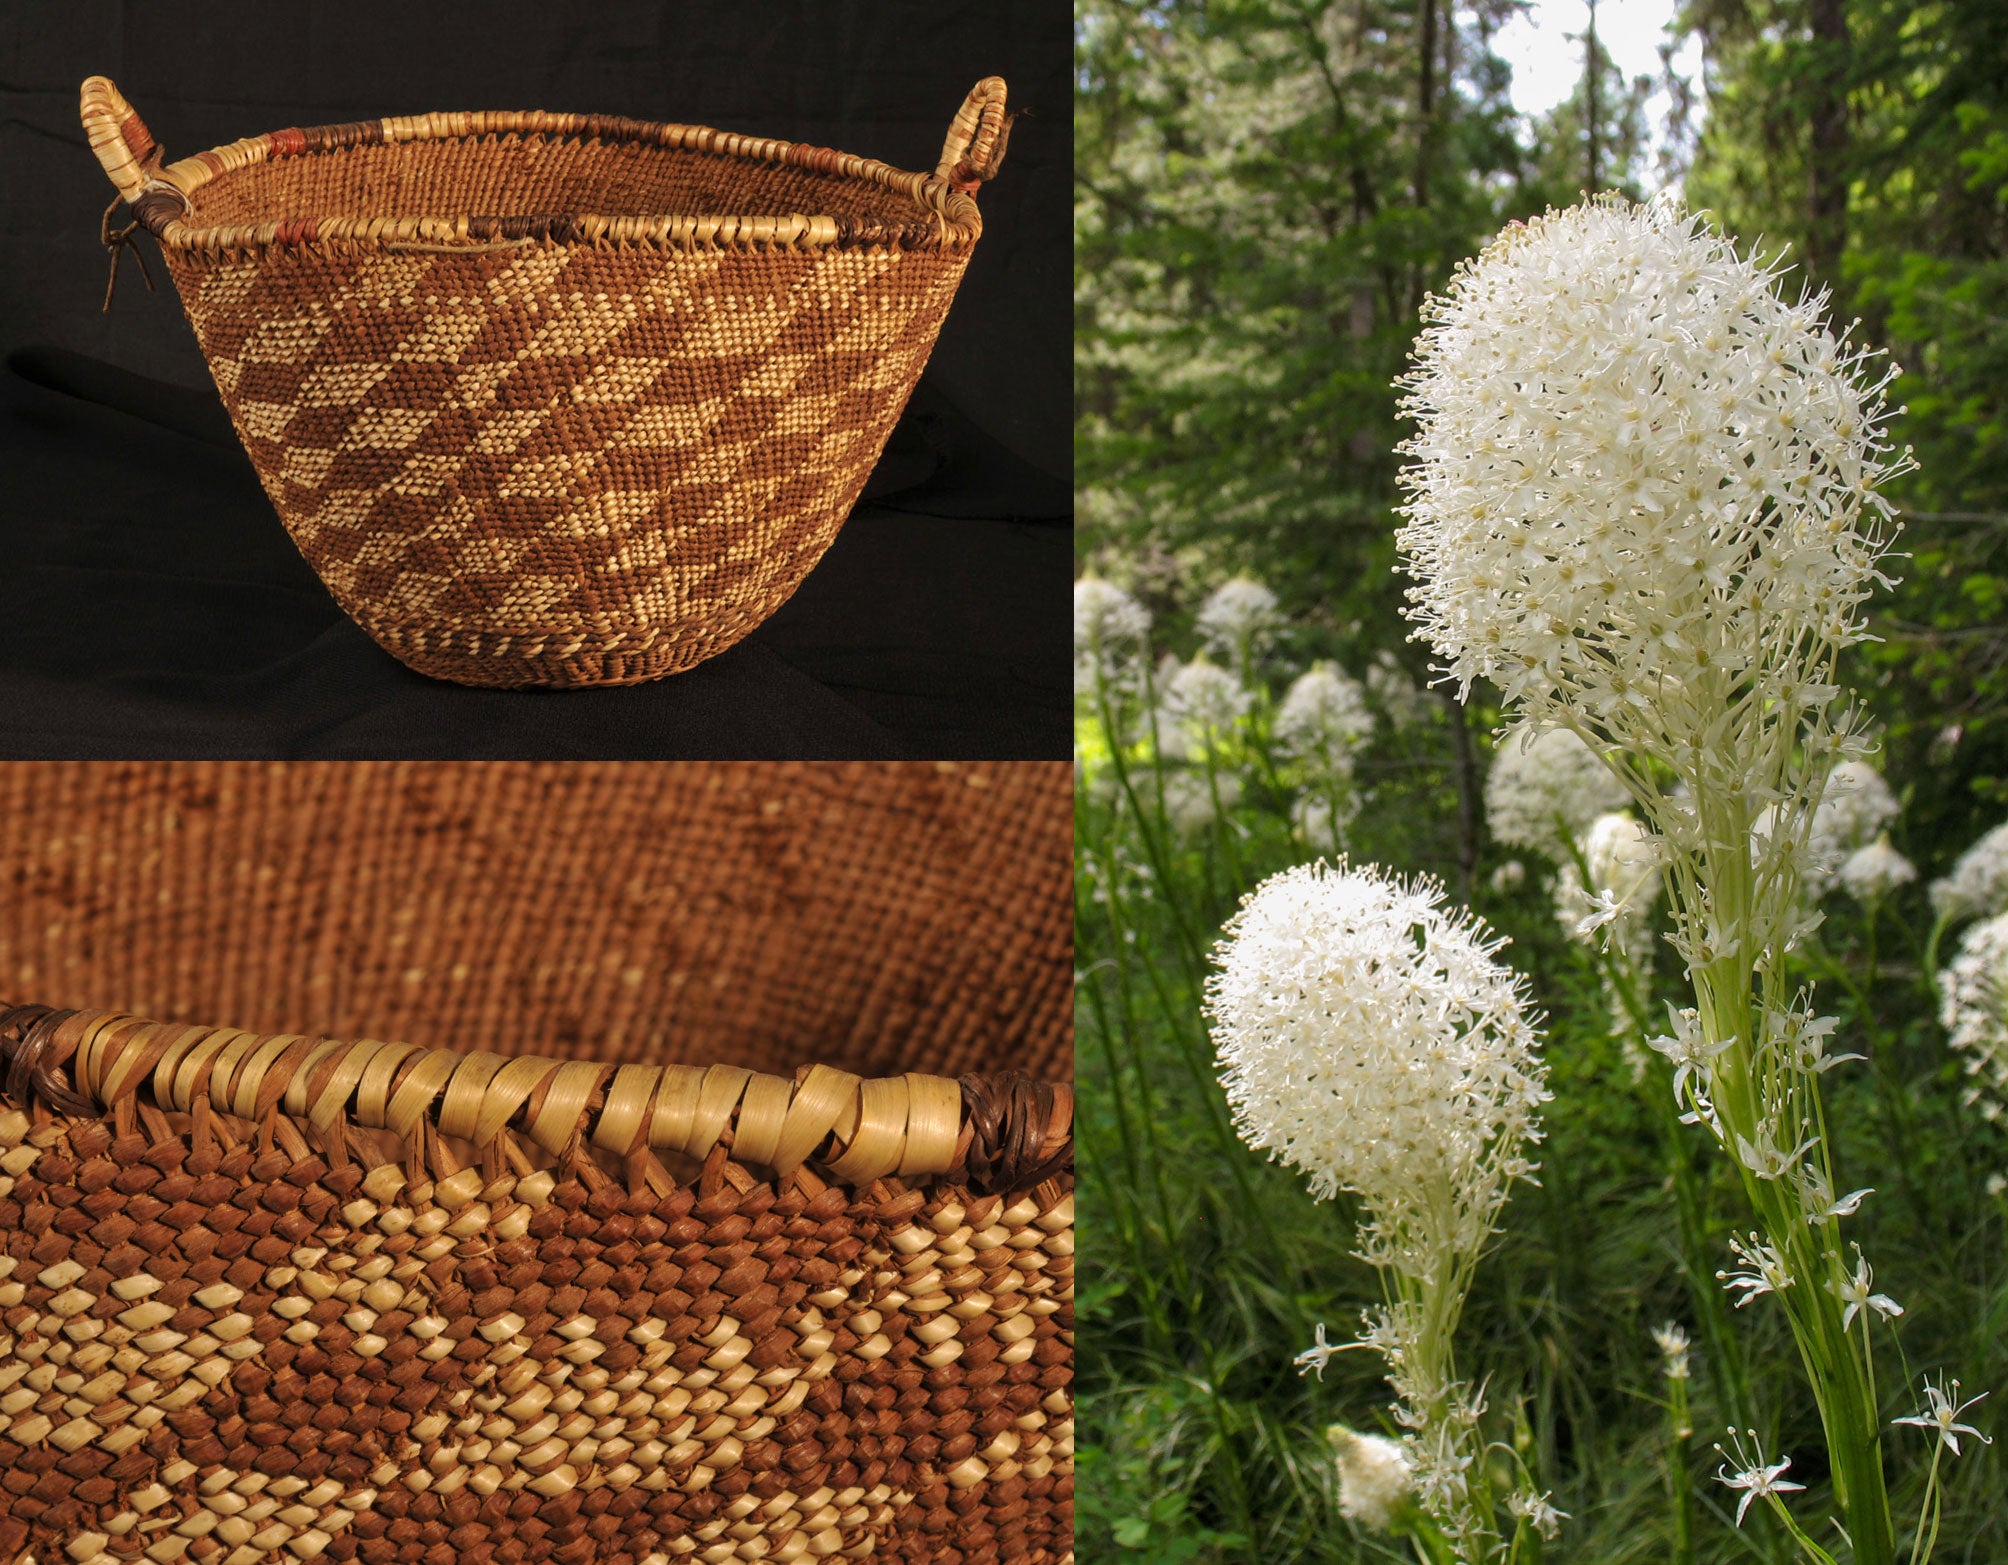 Bear grass and twined basket_0.jpg